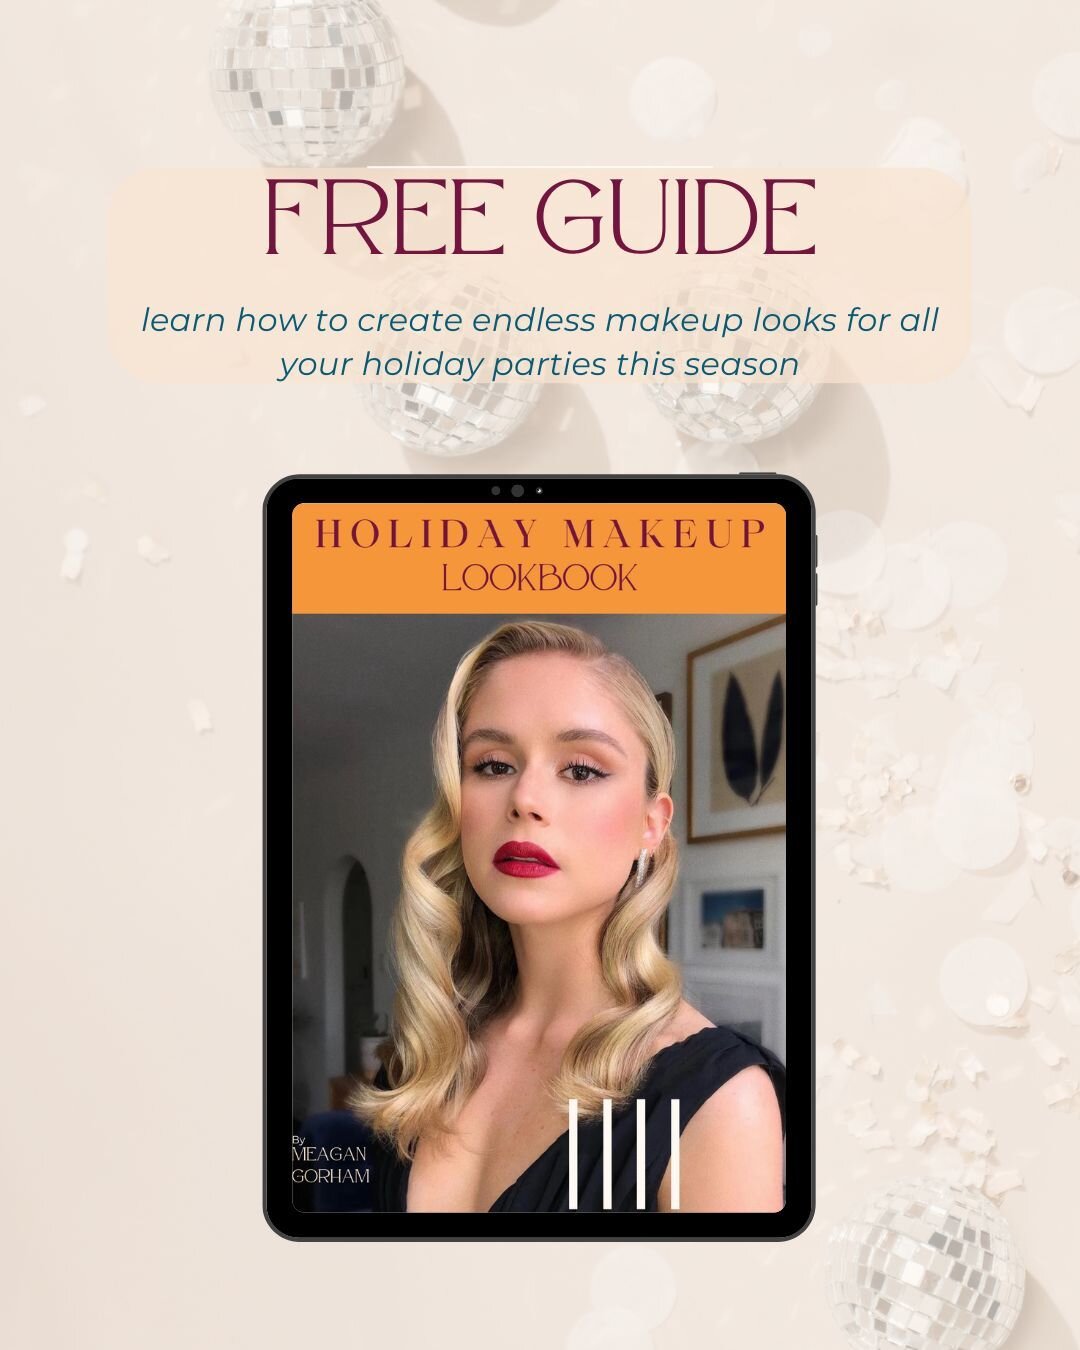 Need a little inspiration to help you sparkle this season? ✨⁠
⁠
I've got a free guide showing you how mix and match basic elements to create an endless combination of looks for all your holiday parties!⁠
⁠
No need to buy a million different products 